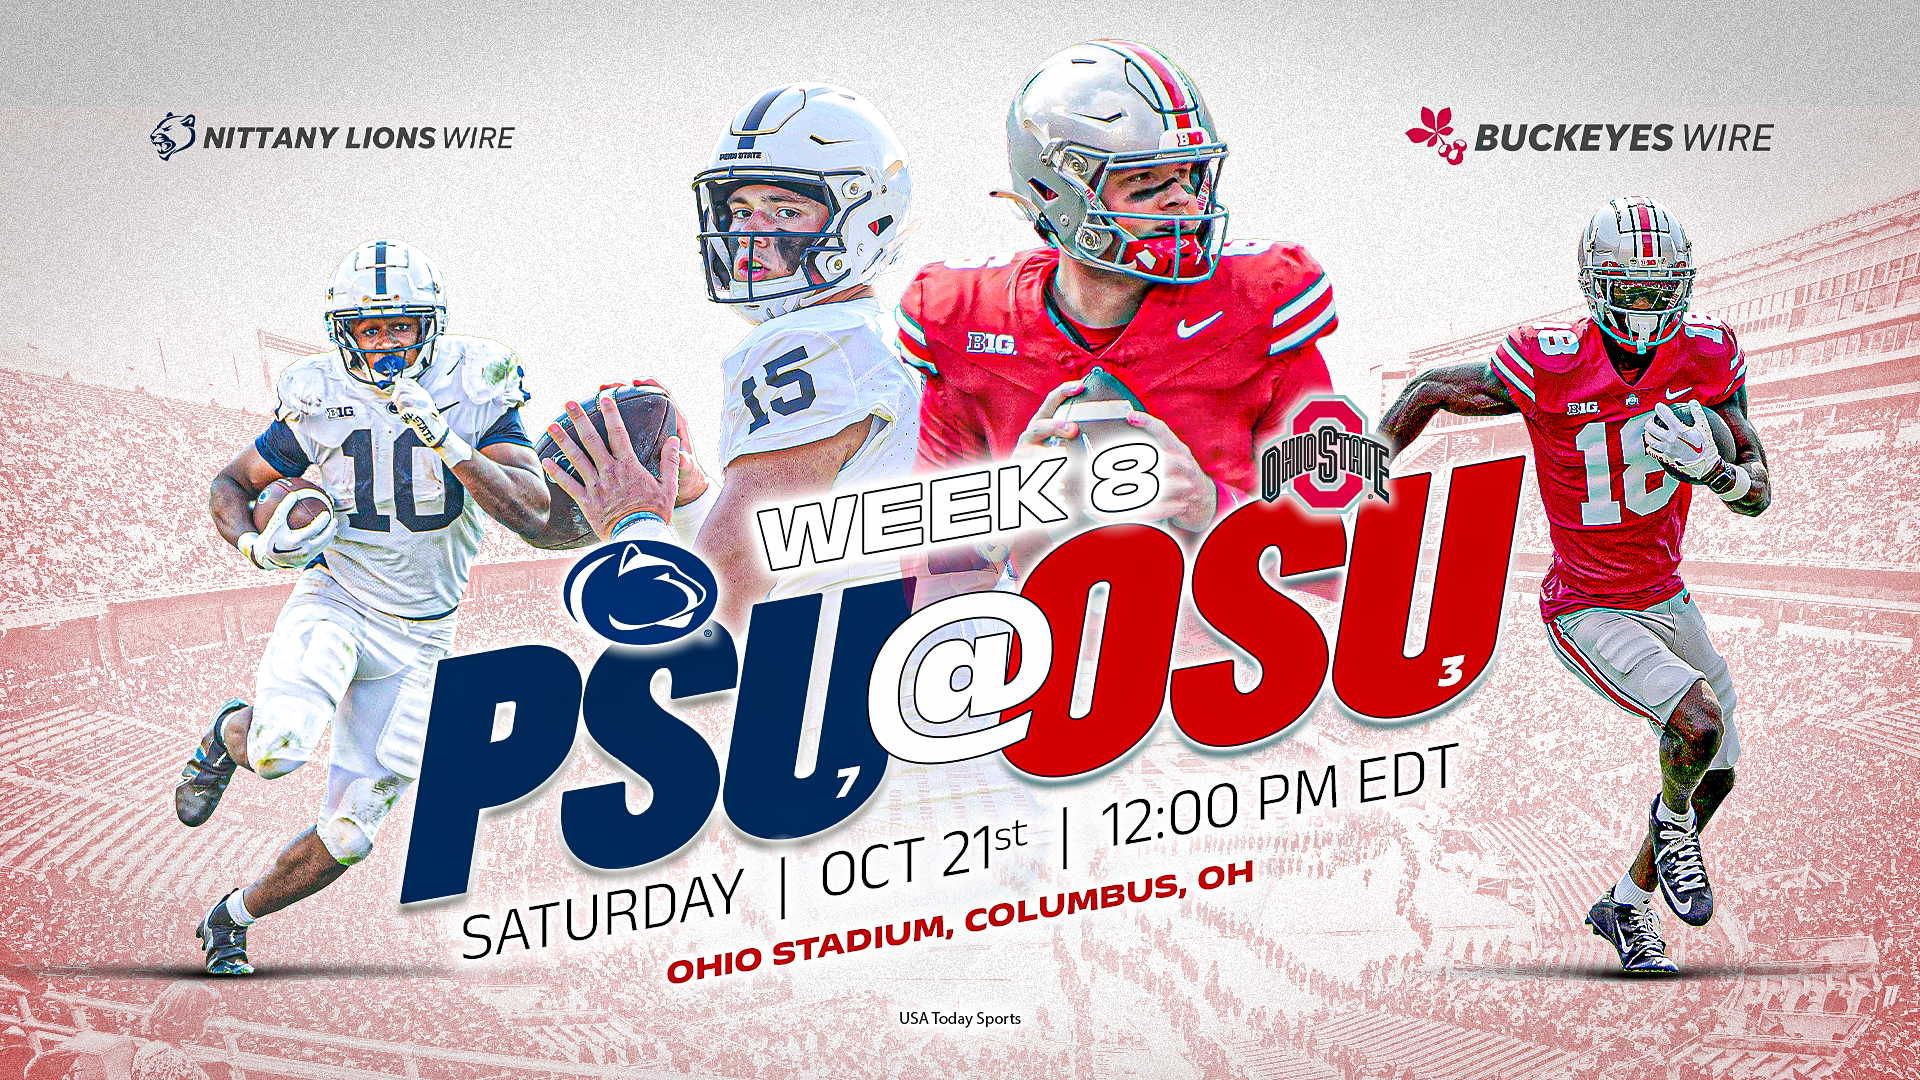 Ohio-State-vs.-Penn-State-poster-1.png